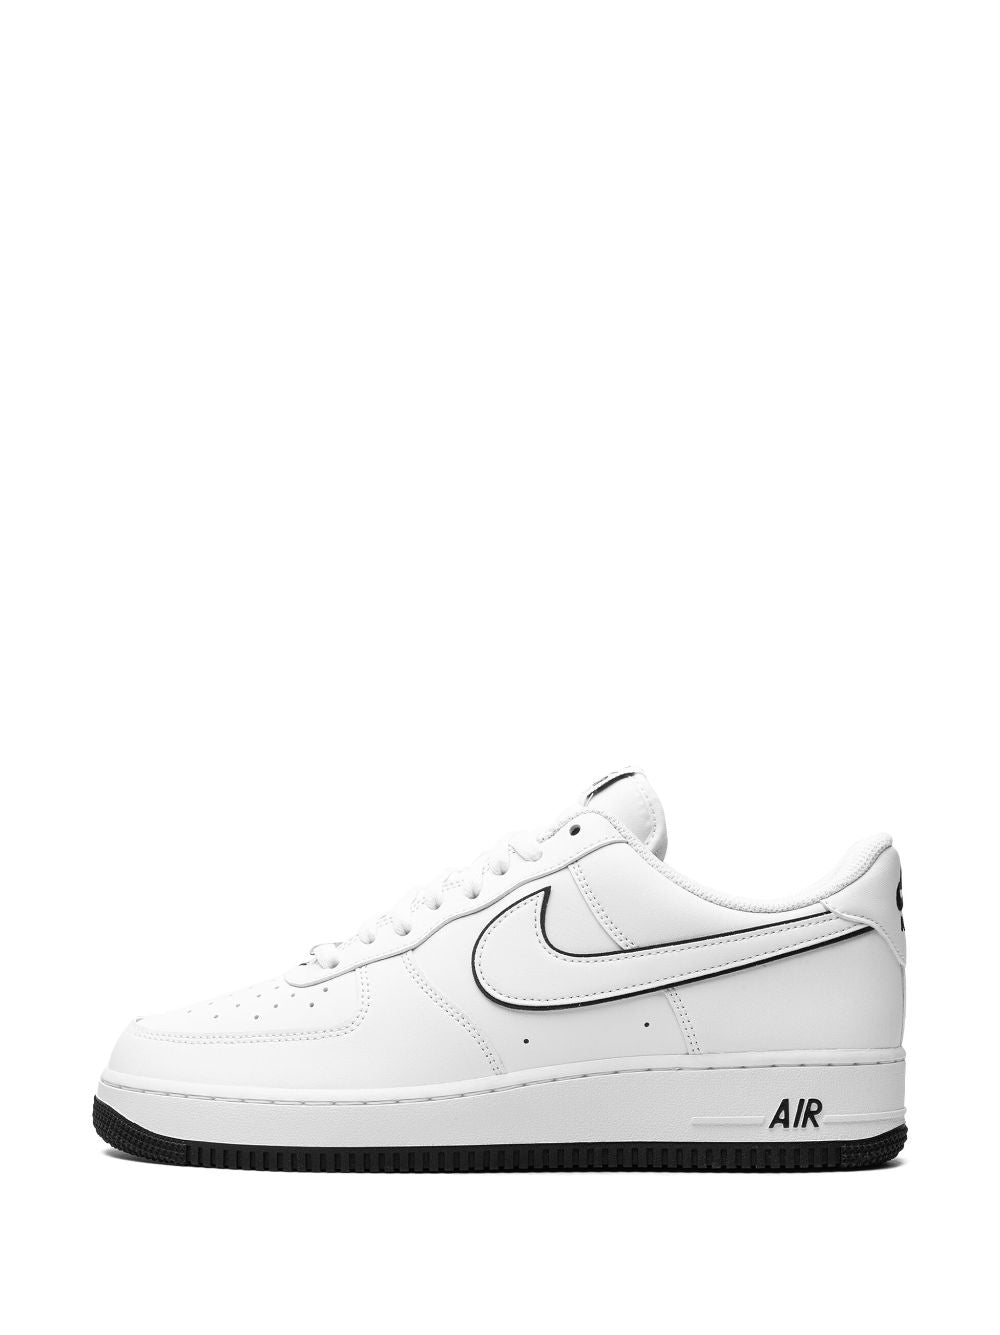 Air Force One WHITE UNC BLACK